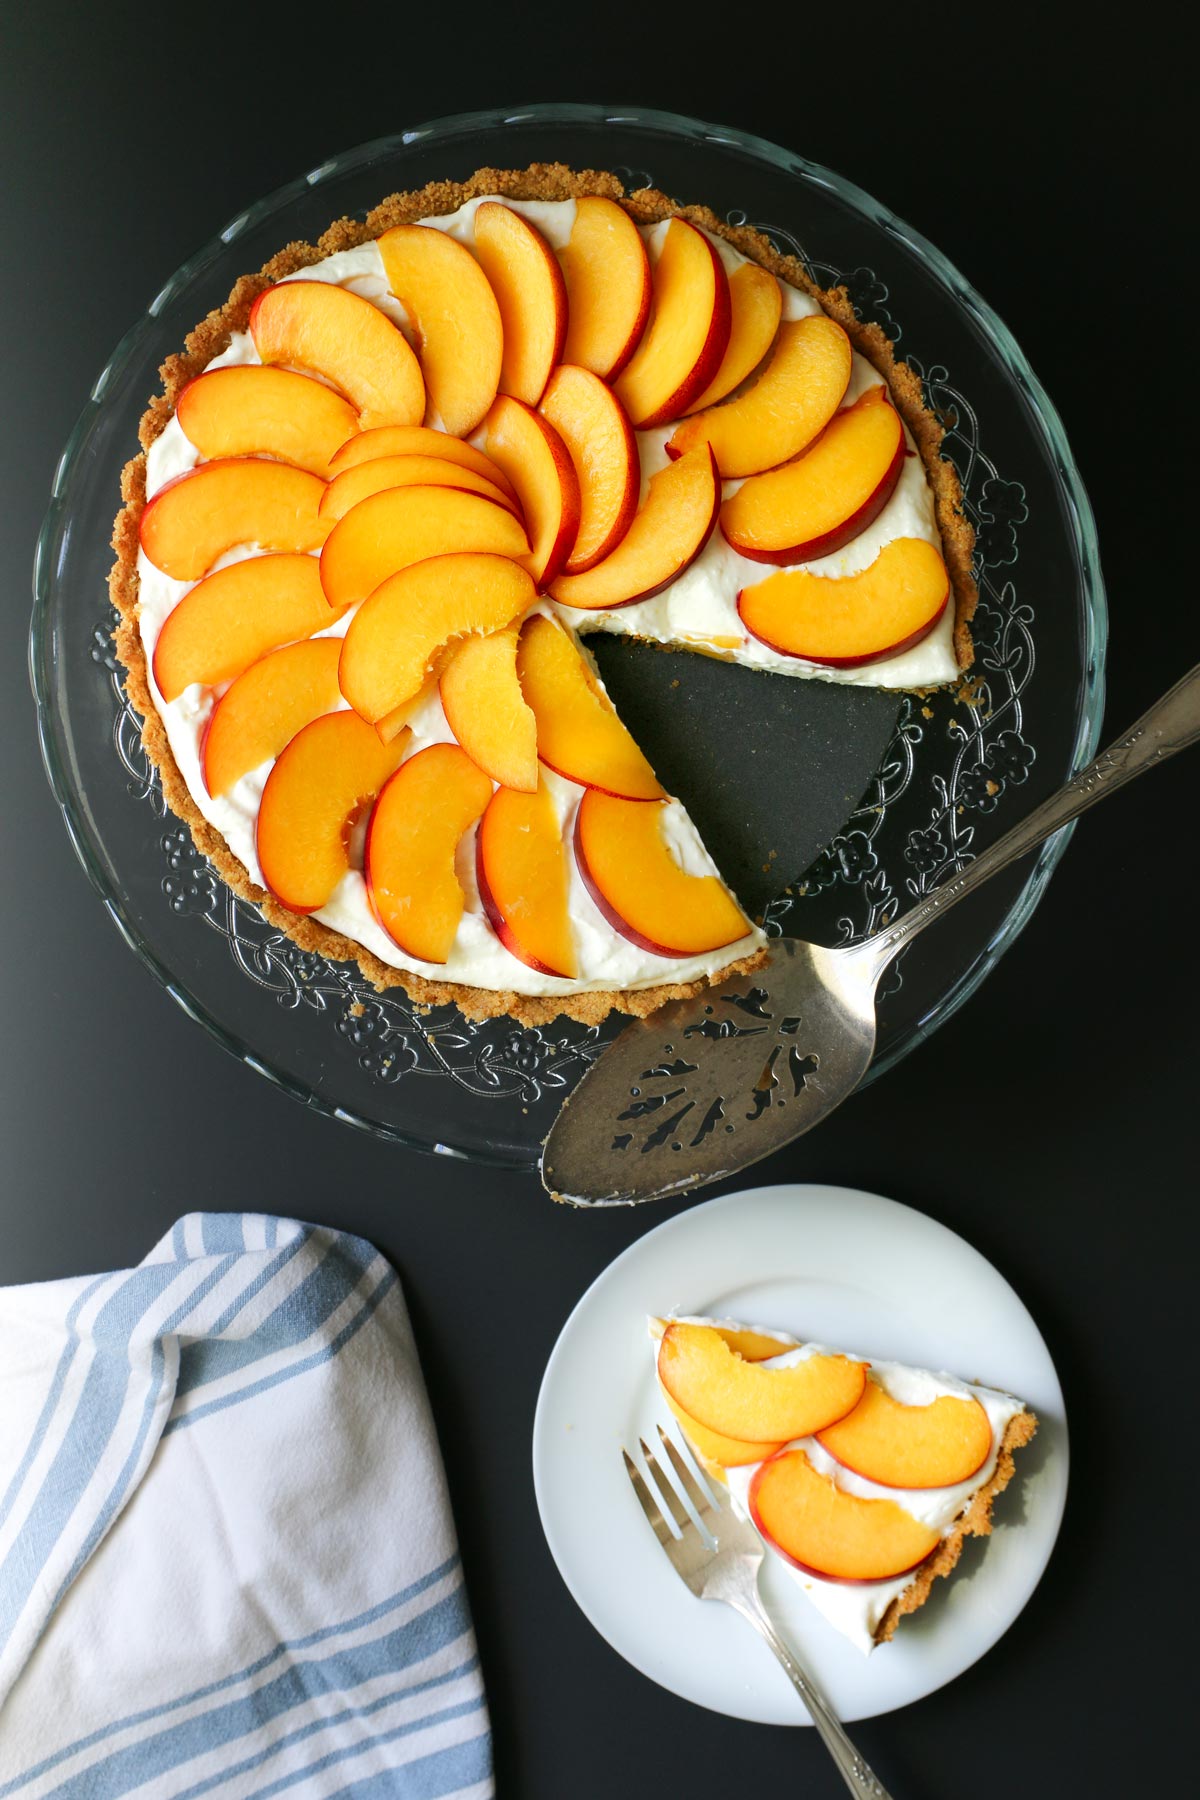 nectarine pie on glass serving platter with a slice cut out on a plate nearby with blue and white napkin on the table.